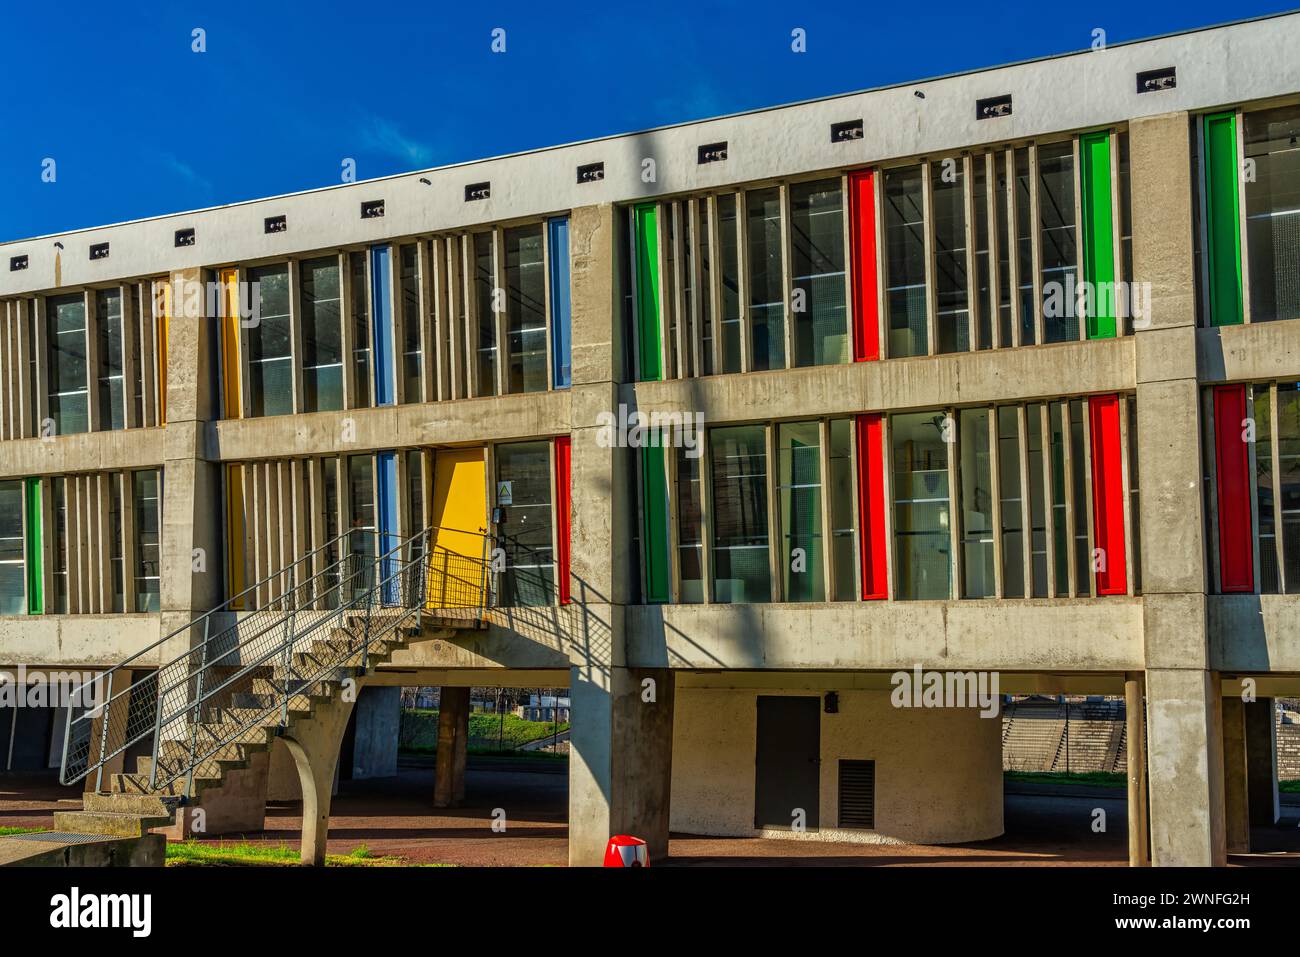 The Maison de la Culture of Firminy, by architect Le Corbusier, has become part of the international network of sites recognized by the UN. Firminy Stock Photo